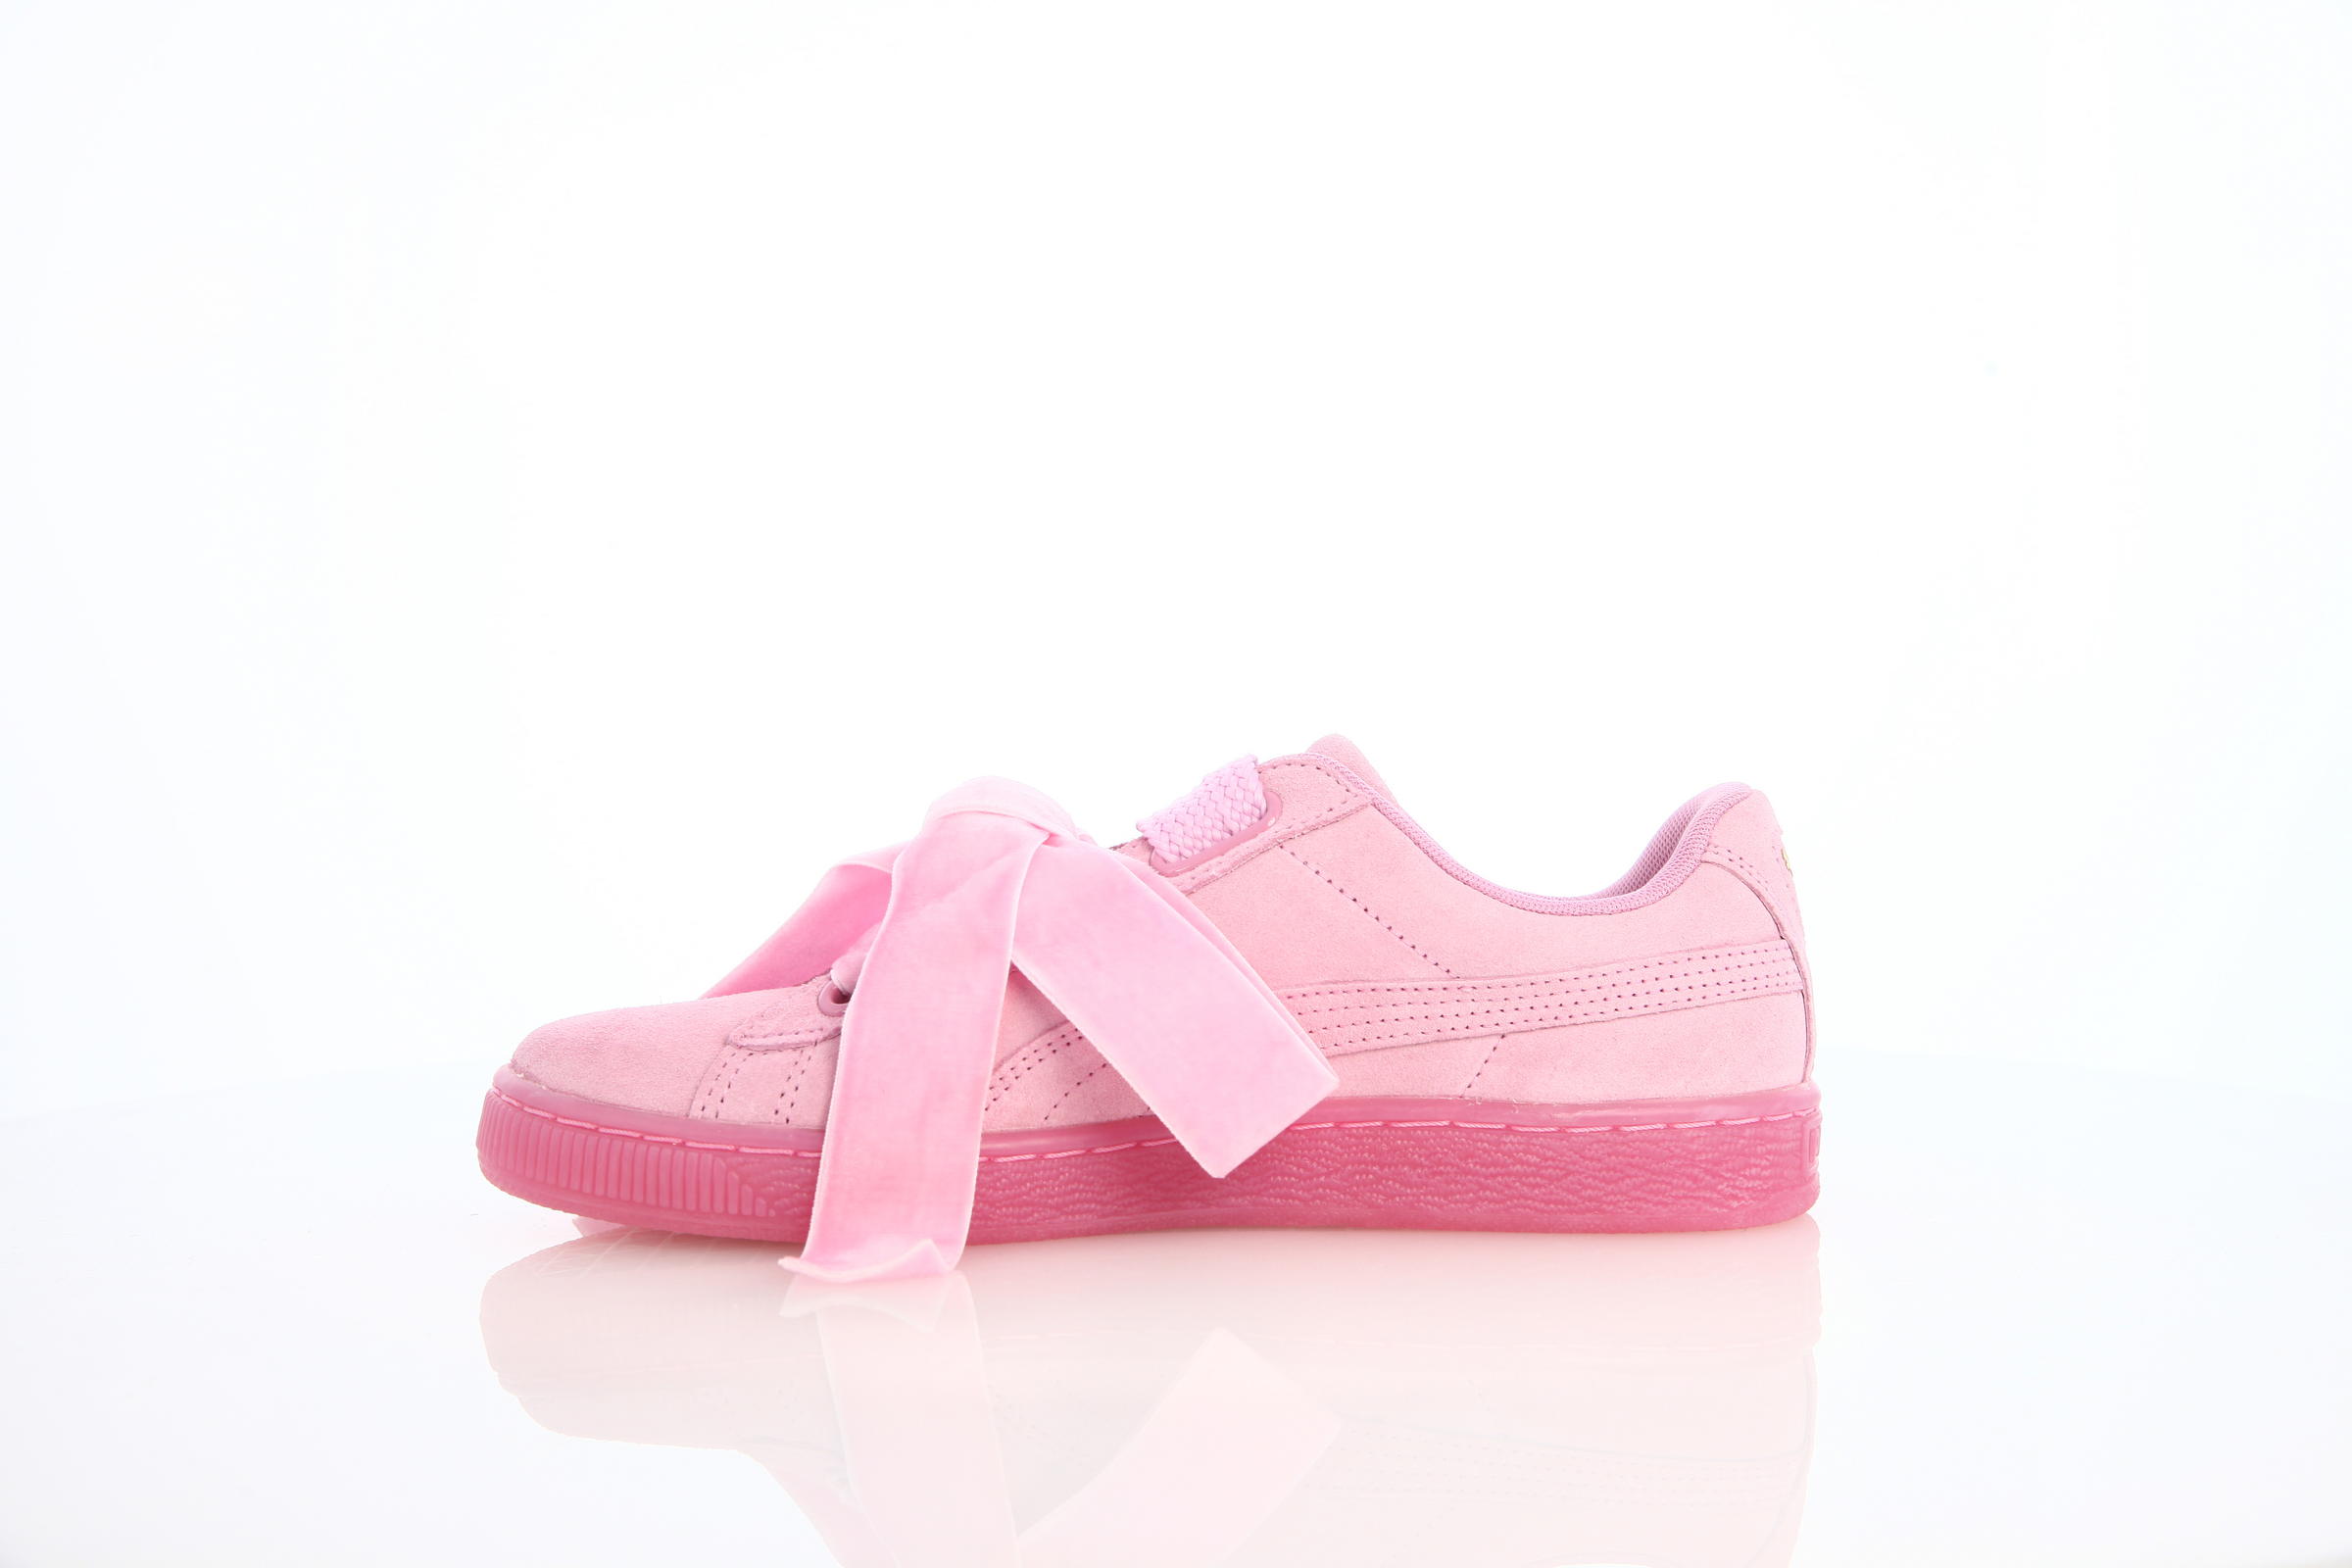 Puma Suede Heart RESET Wn's "Prism Pink"